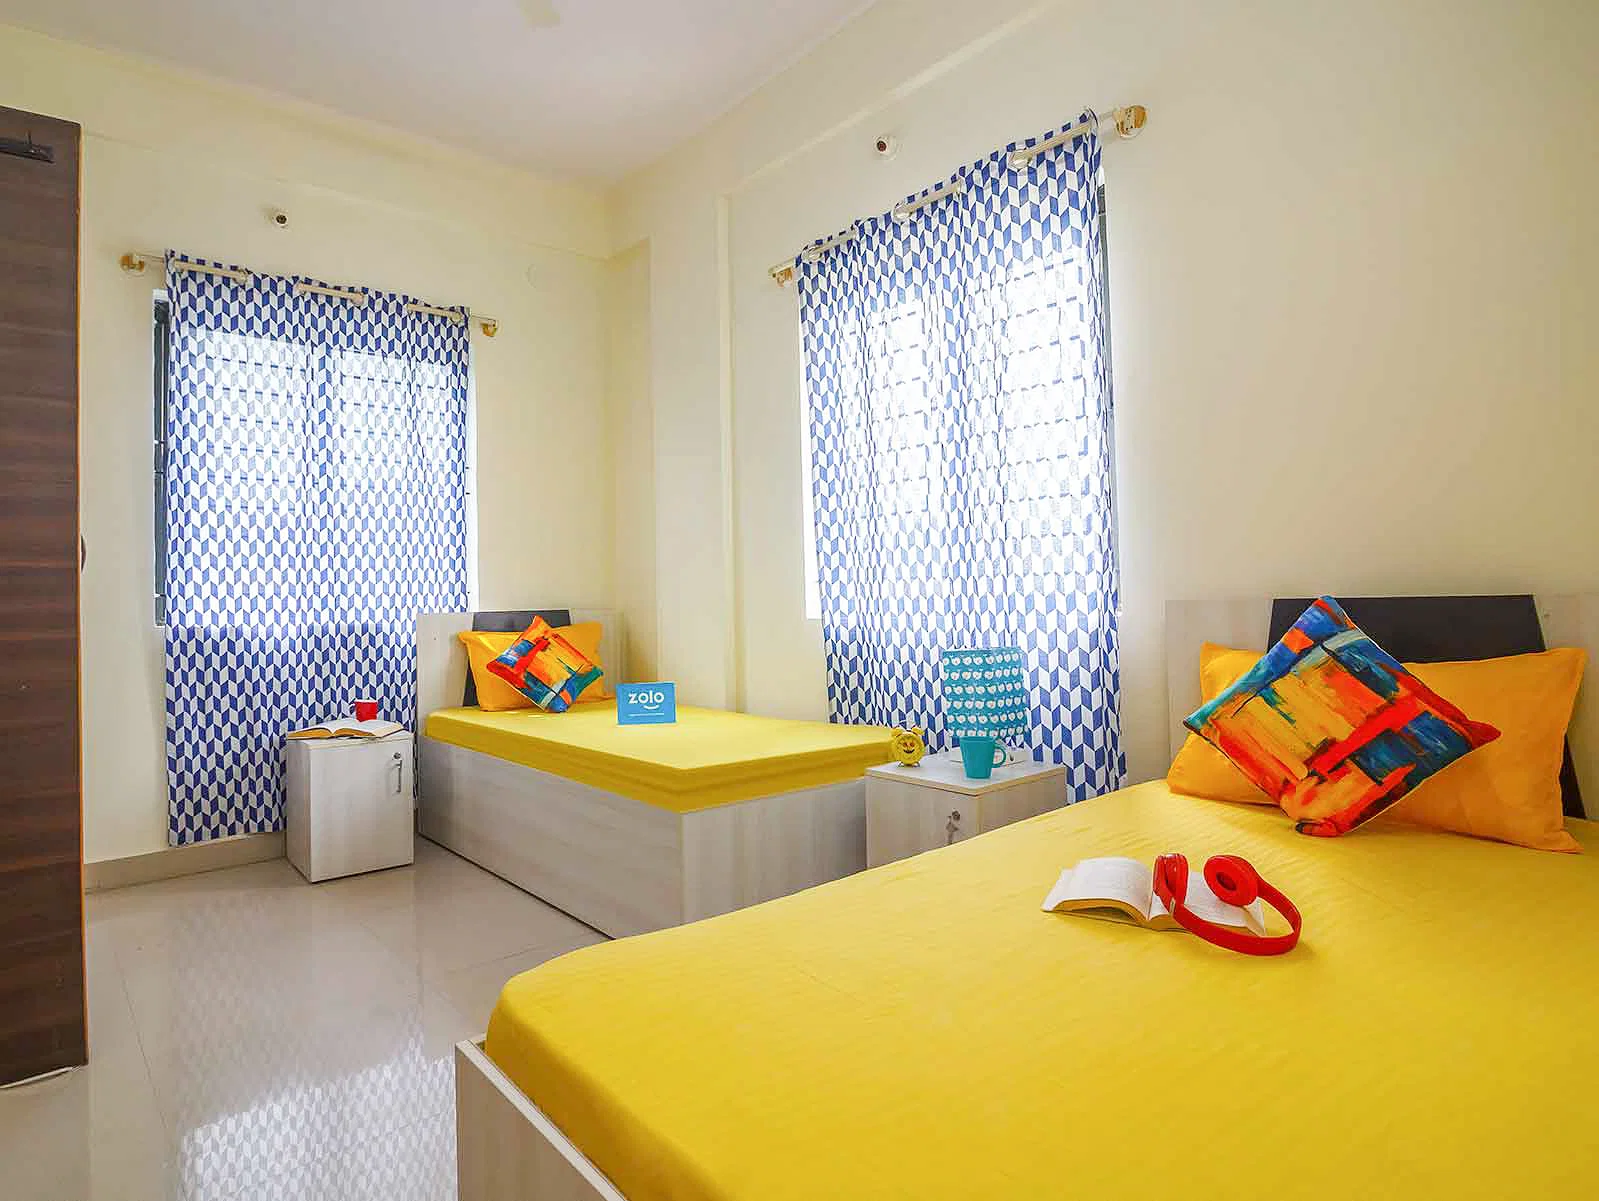 budget-friendly PGs and hostels for women with single rooms with daily hopusekeeping-Zolo Eternal